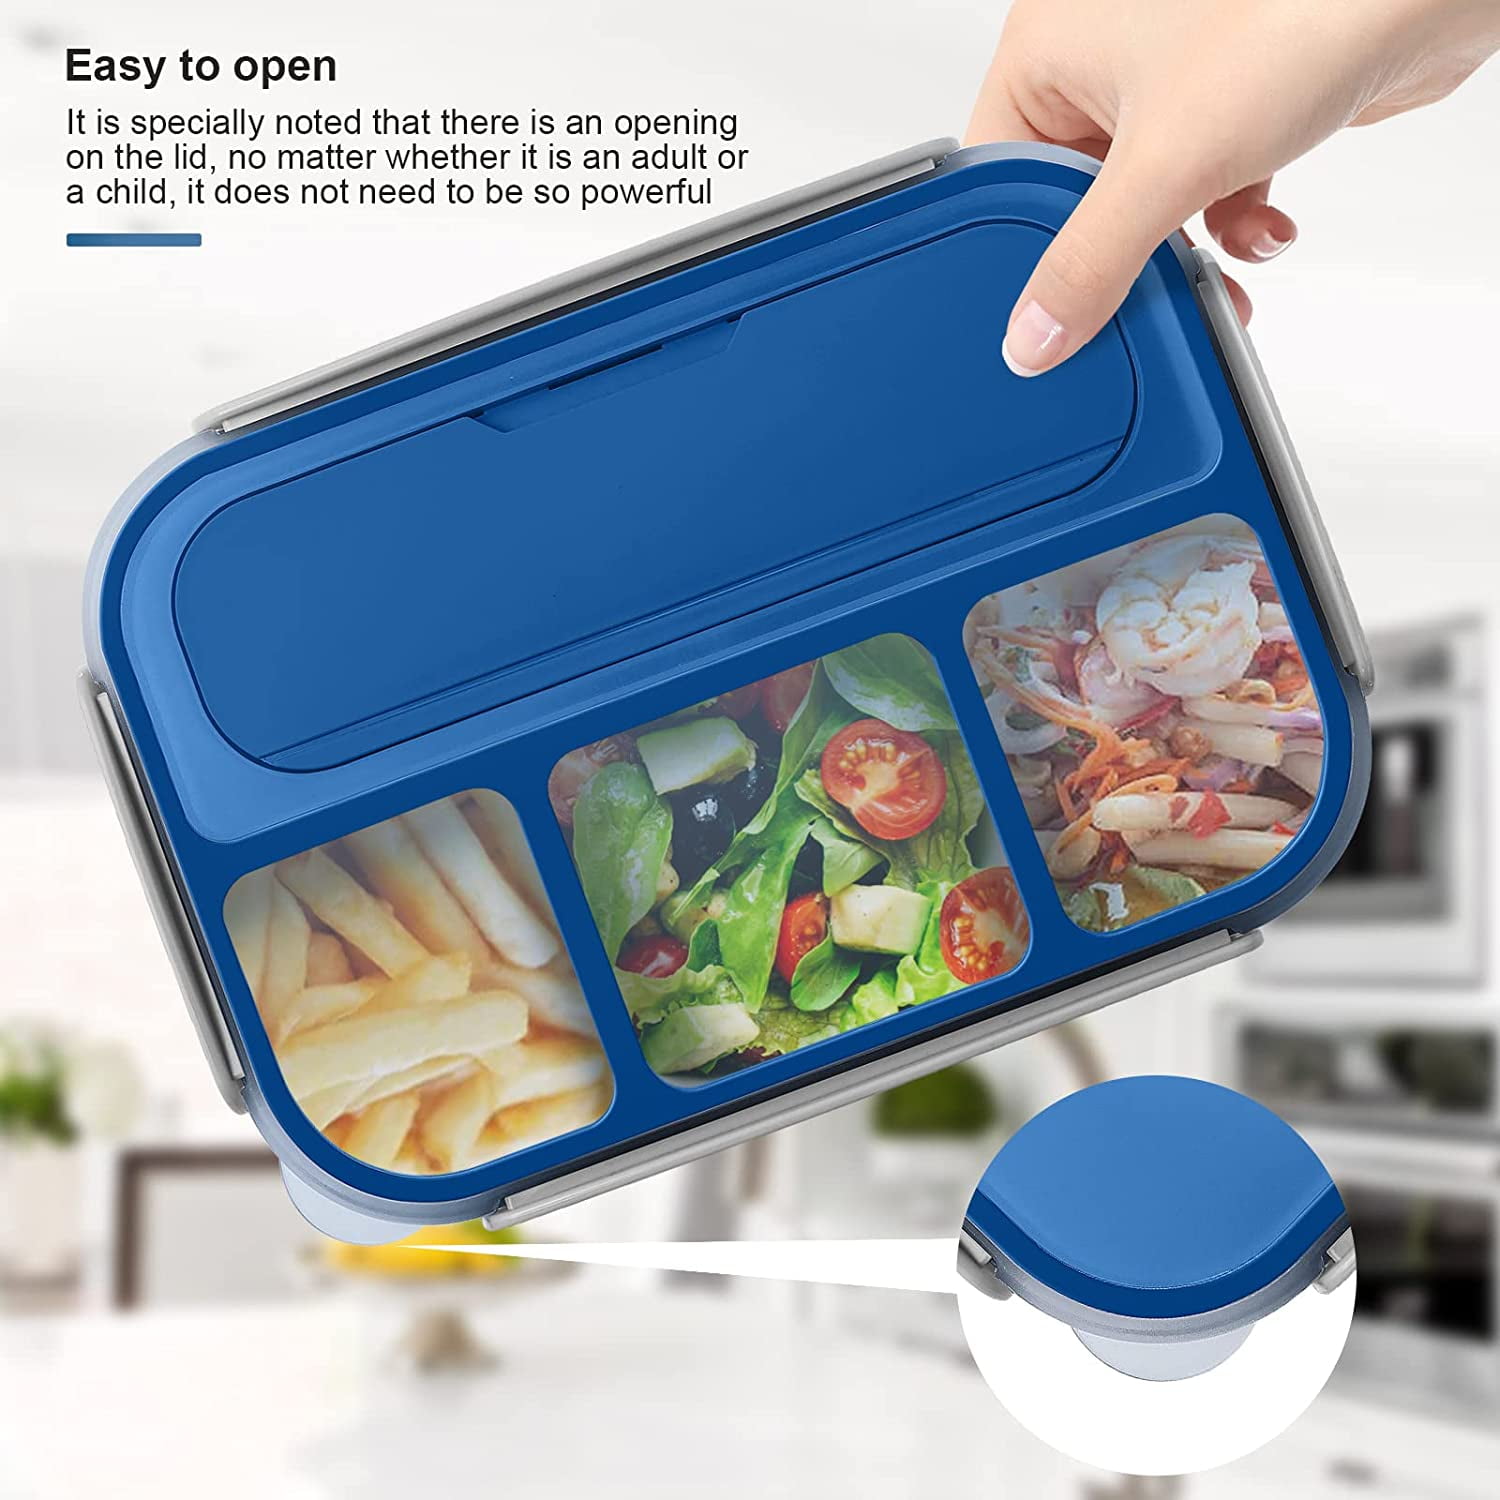  Dagugu Lunch Box Kids,Bento Box Adult Lunch Box,Lunch Box  Containers for Adults/Kids/Toddler,5 Compartments Bento Lunch Box with  Leakproof Sauce Vontainers,Microwave/Dishwasher/BPA Free(Blue): Home &  Kitchen